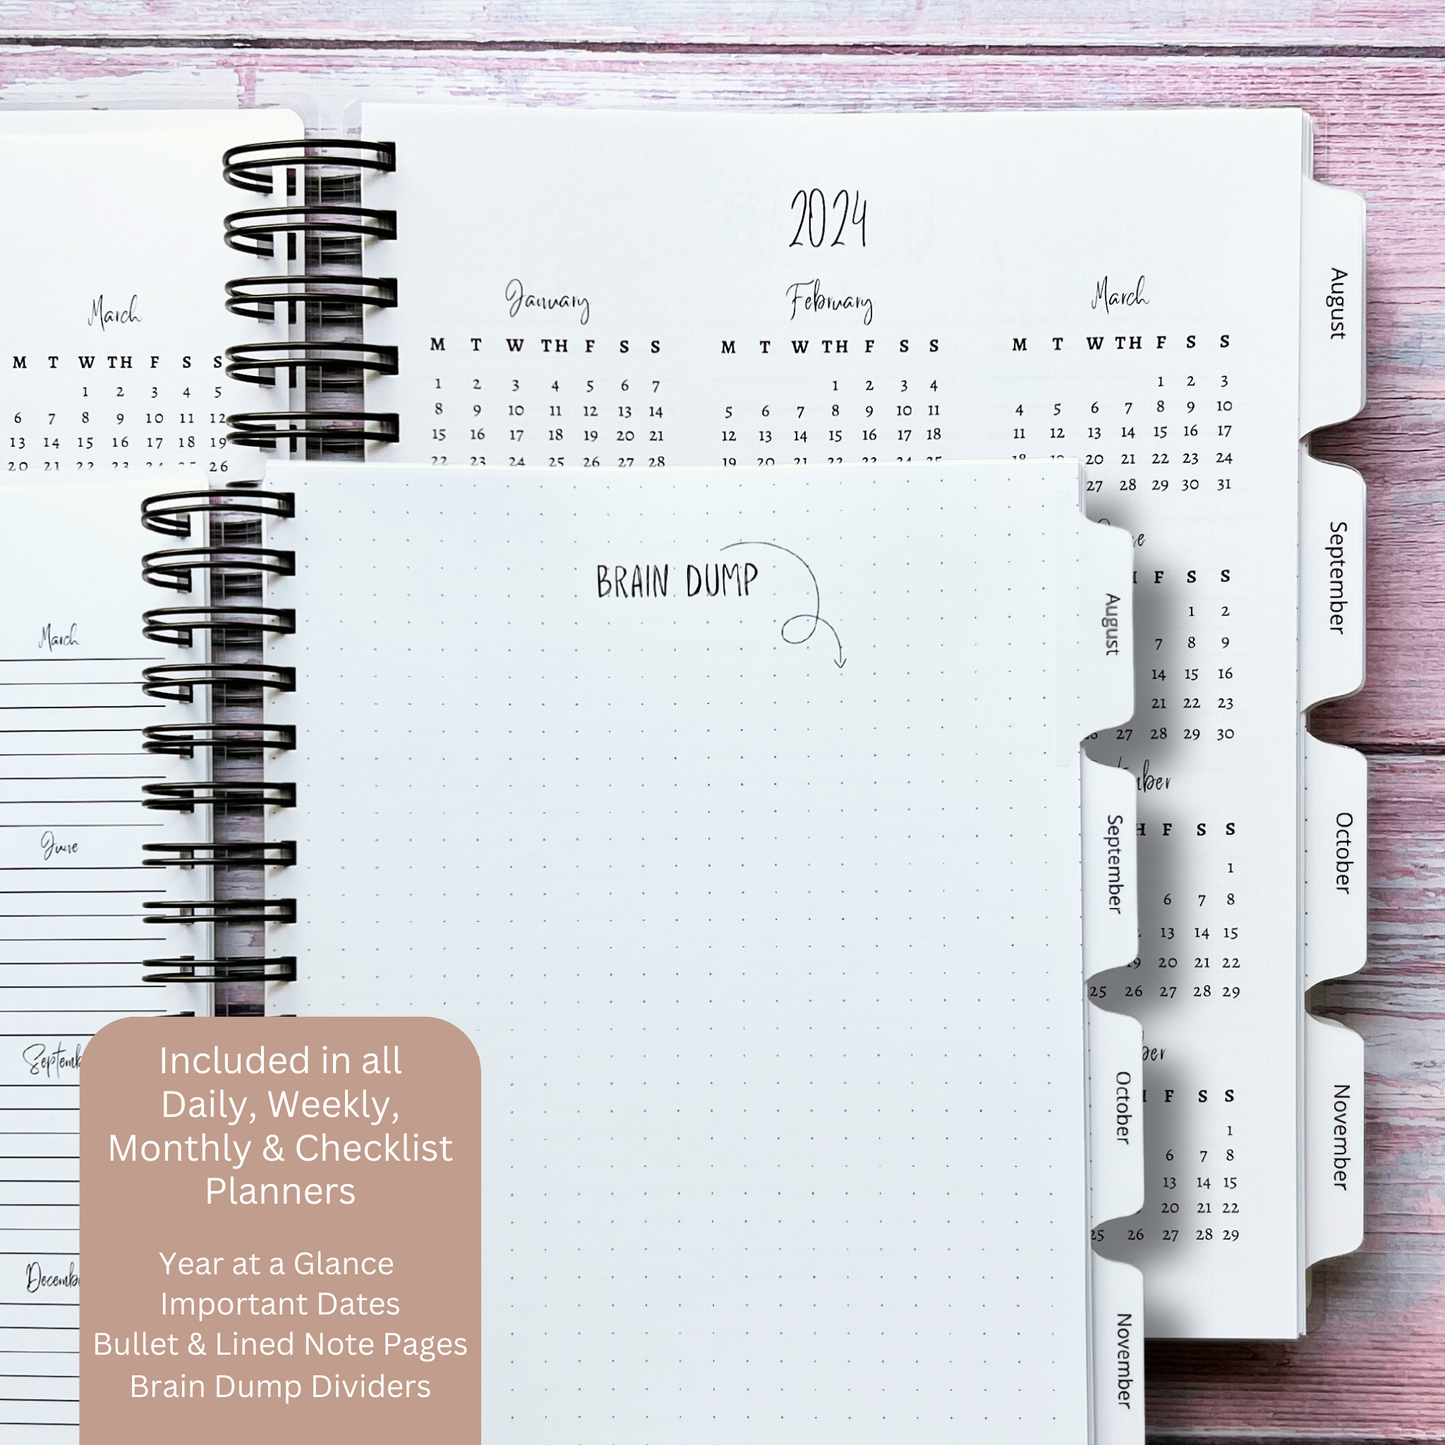 Personalized Monthly Planner - Vintage Goth